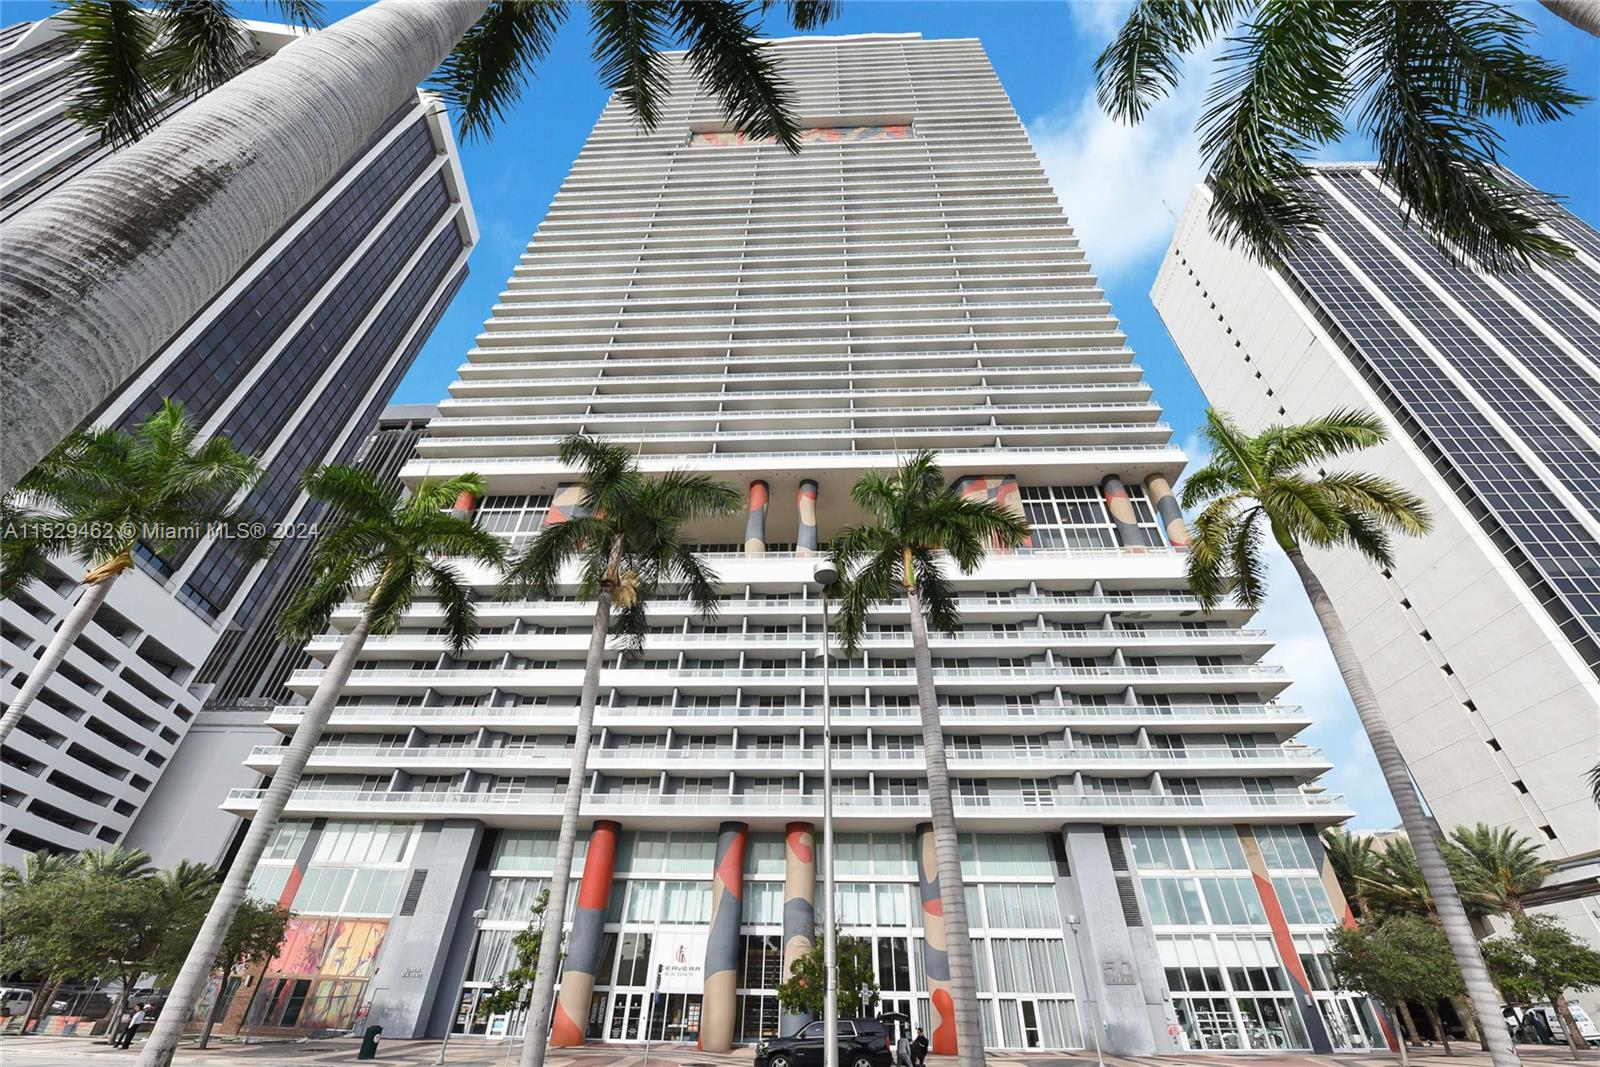 Welcome to this amazing high-floor home w/ panoramic East views towering over Biscayne Bay, offering endless inspiration in an unbeatable location. With a vast floor plan featuring 3 beds, an open kitchen, washer/dryer, & sleek high gloss flooring throughout, this unfurnished unit is a dream come true. Step onto the massive wrap-around terrace, perfectly positioned on the corner, to take in gorgeous views of Downtown from every angle. Enjoy the convenience of 1 assigned parking space plus valet service. This amenity-rich and pet-friendly building provides easy access to major thoroughfares, Metro Rail/Mover, as well as a myriad of dining, shopping, and entertainment options. Don't miss out on this opportunity for living large in Miami! Available March 5th. Experience Home, One Step Closer!